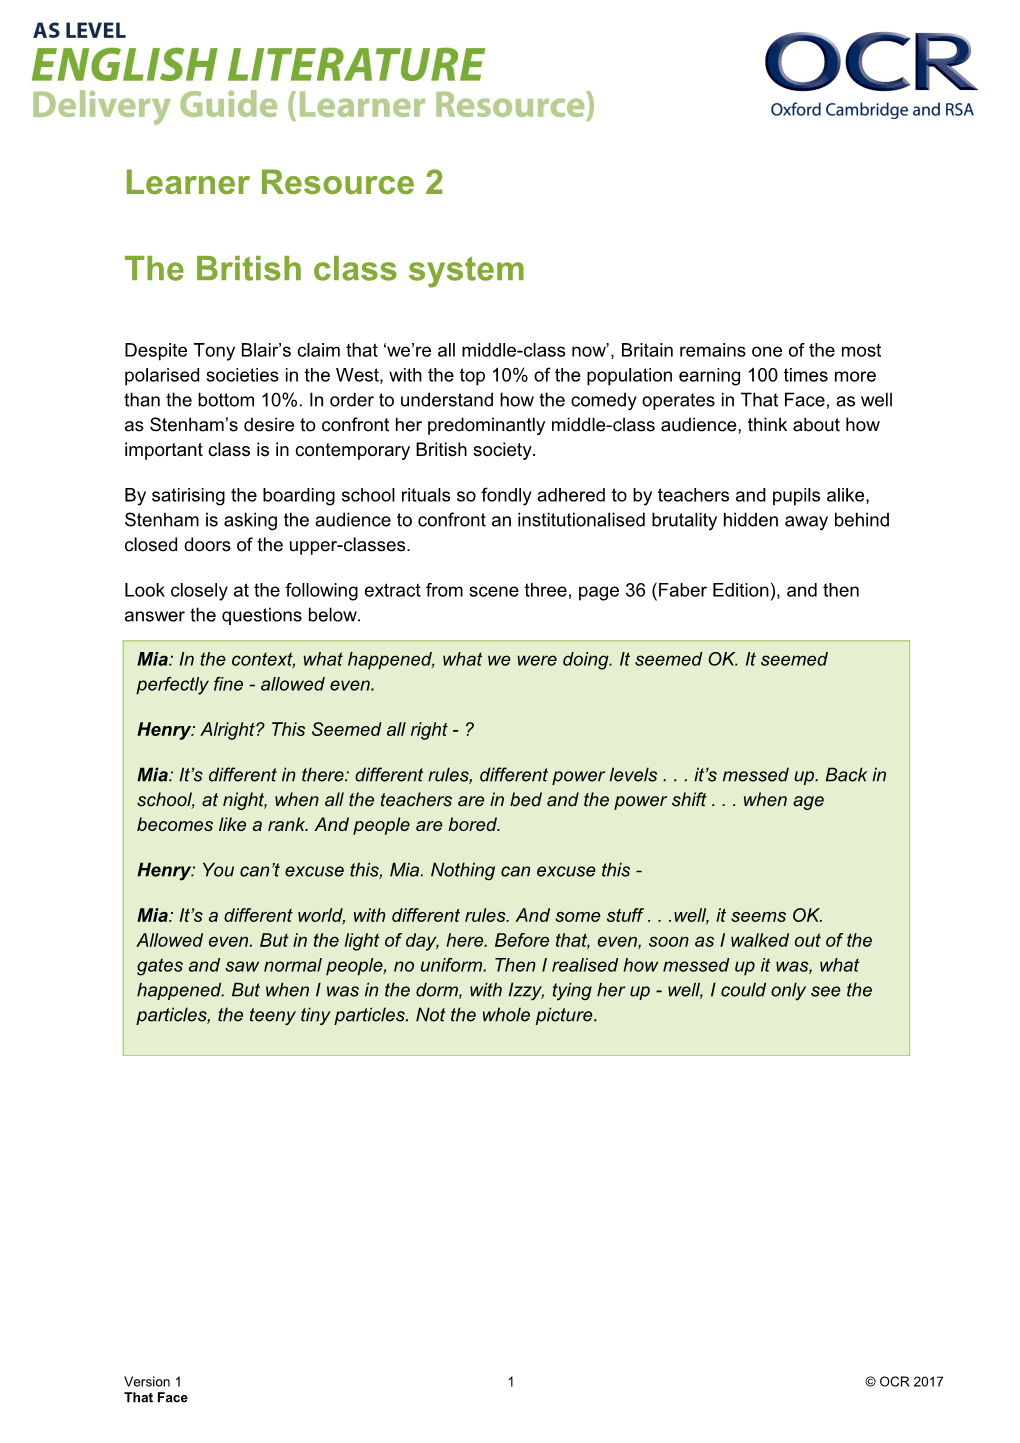 OCR AS Level English Literature Digital Resource 2 - the British Class System